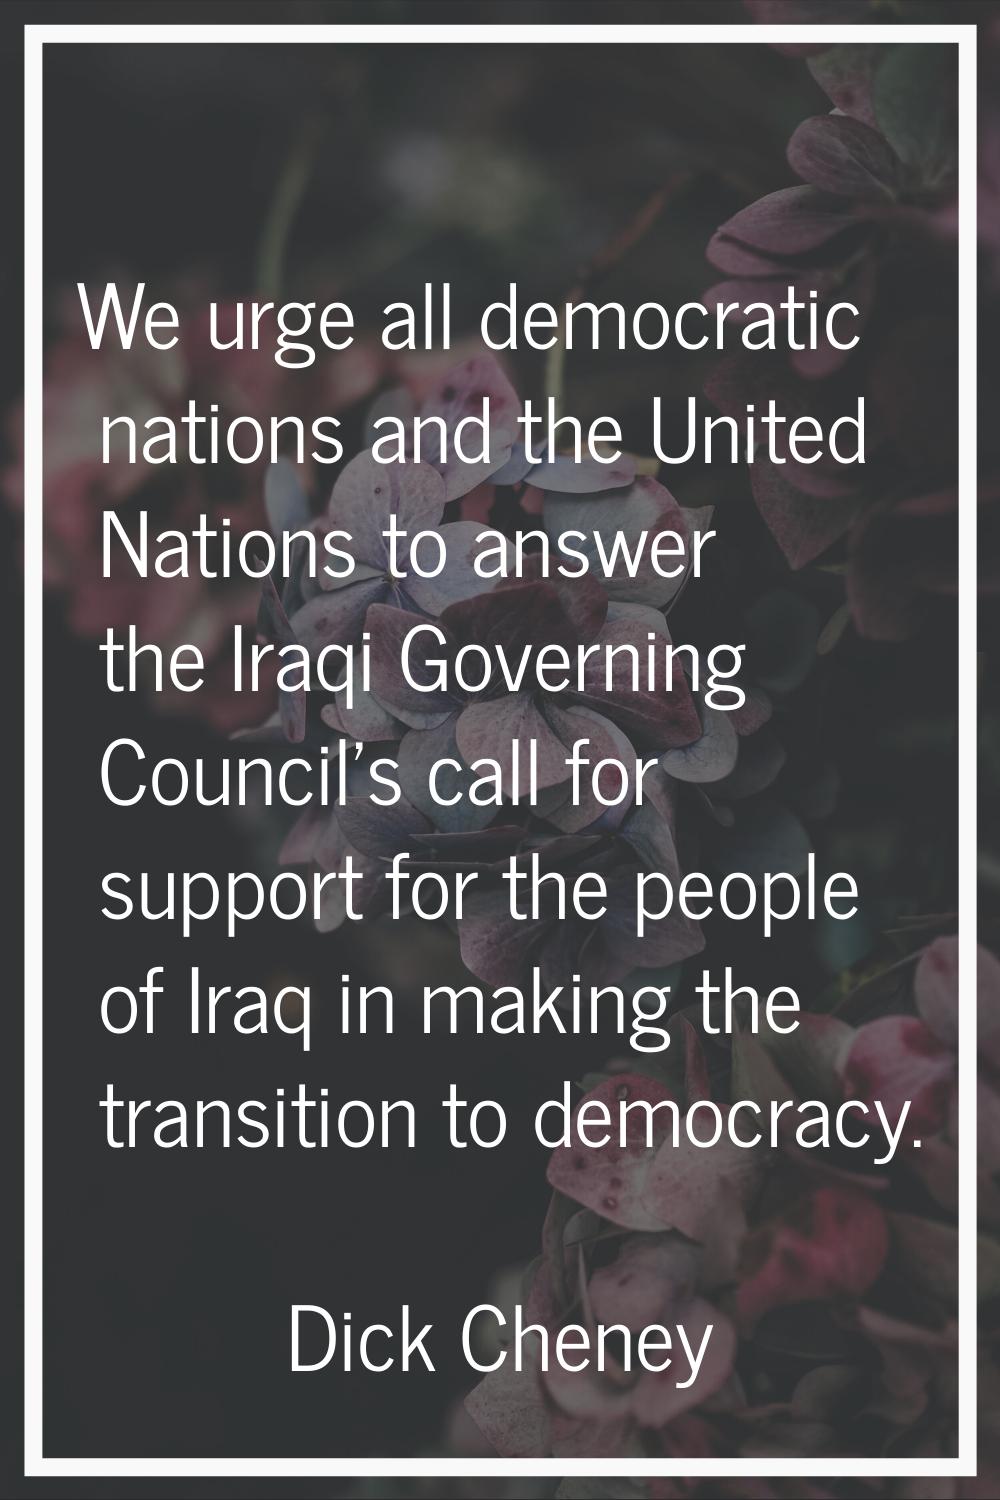 We urge all democratic nations and the United Nations to answer the Iraqi Governing Council's call 